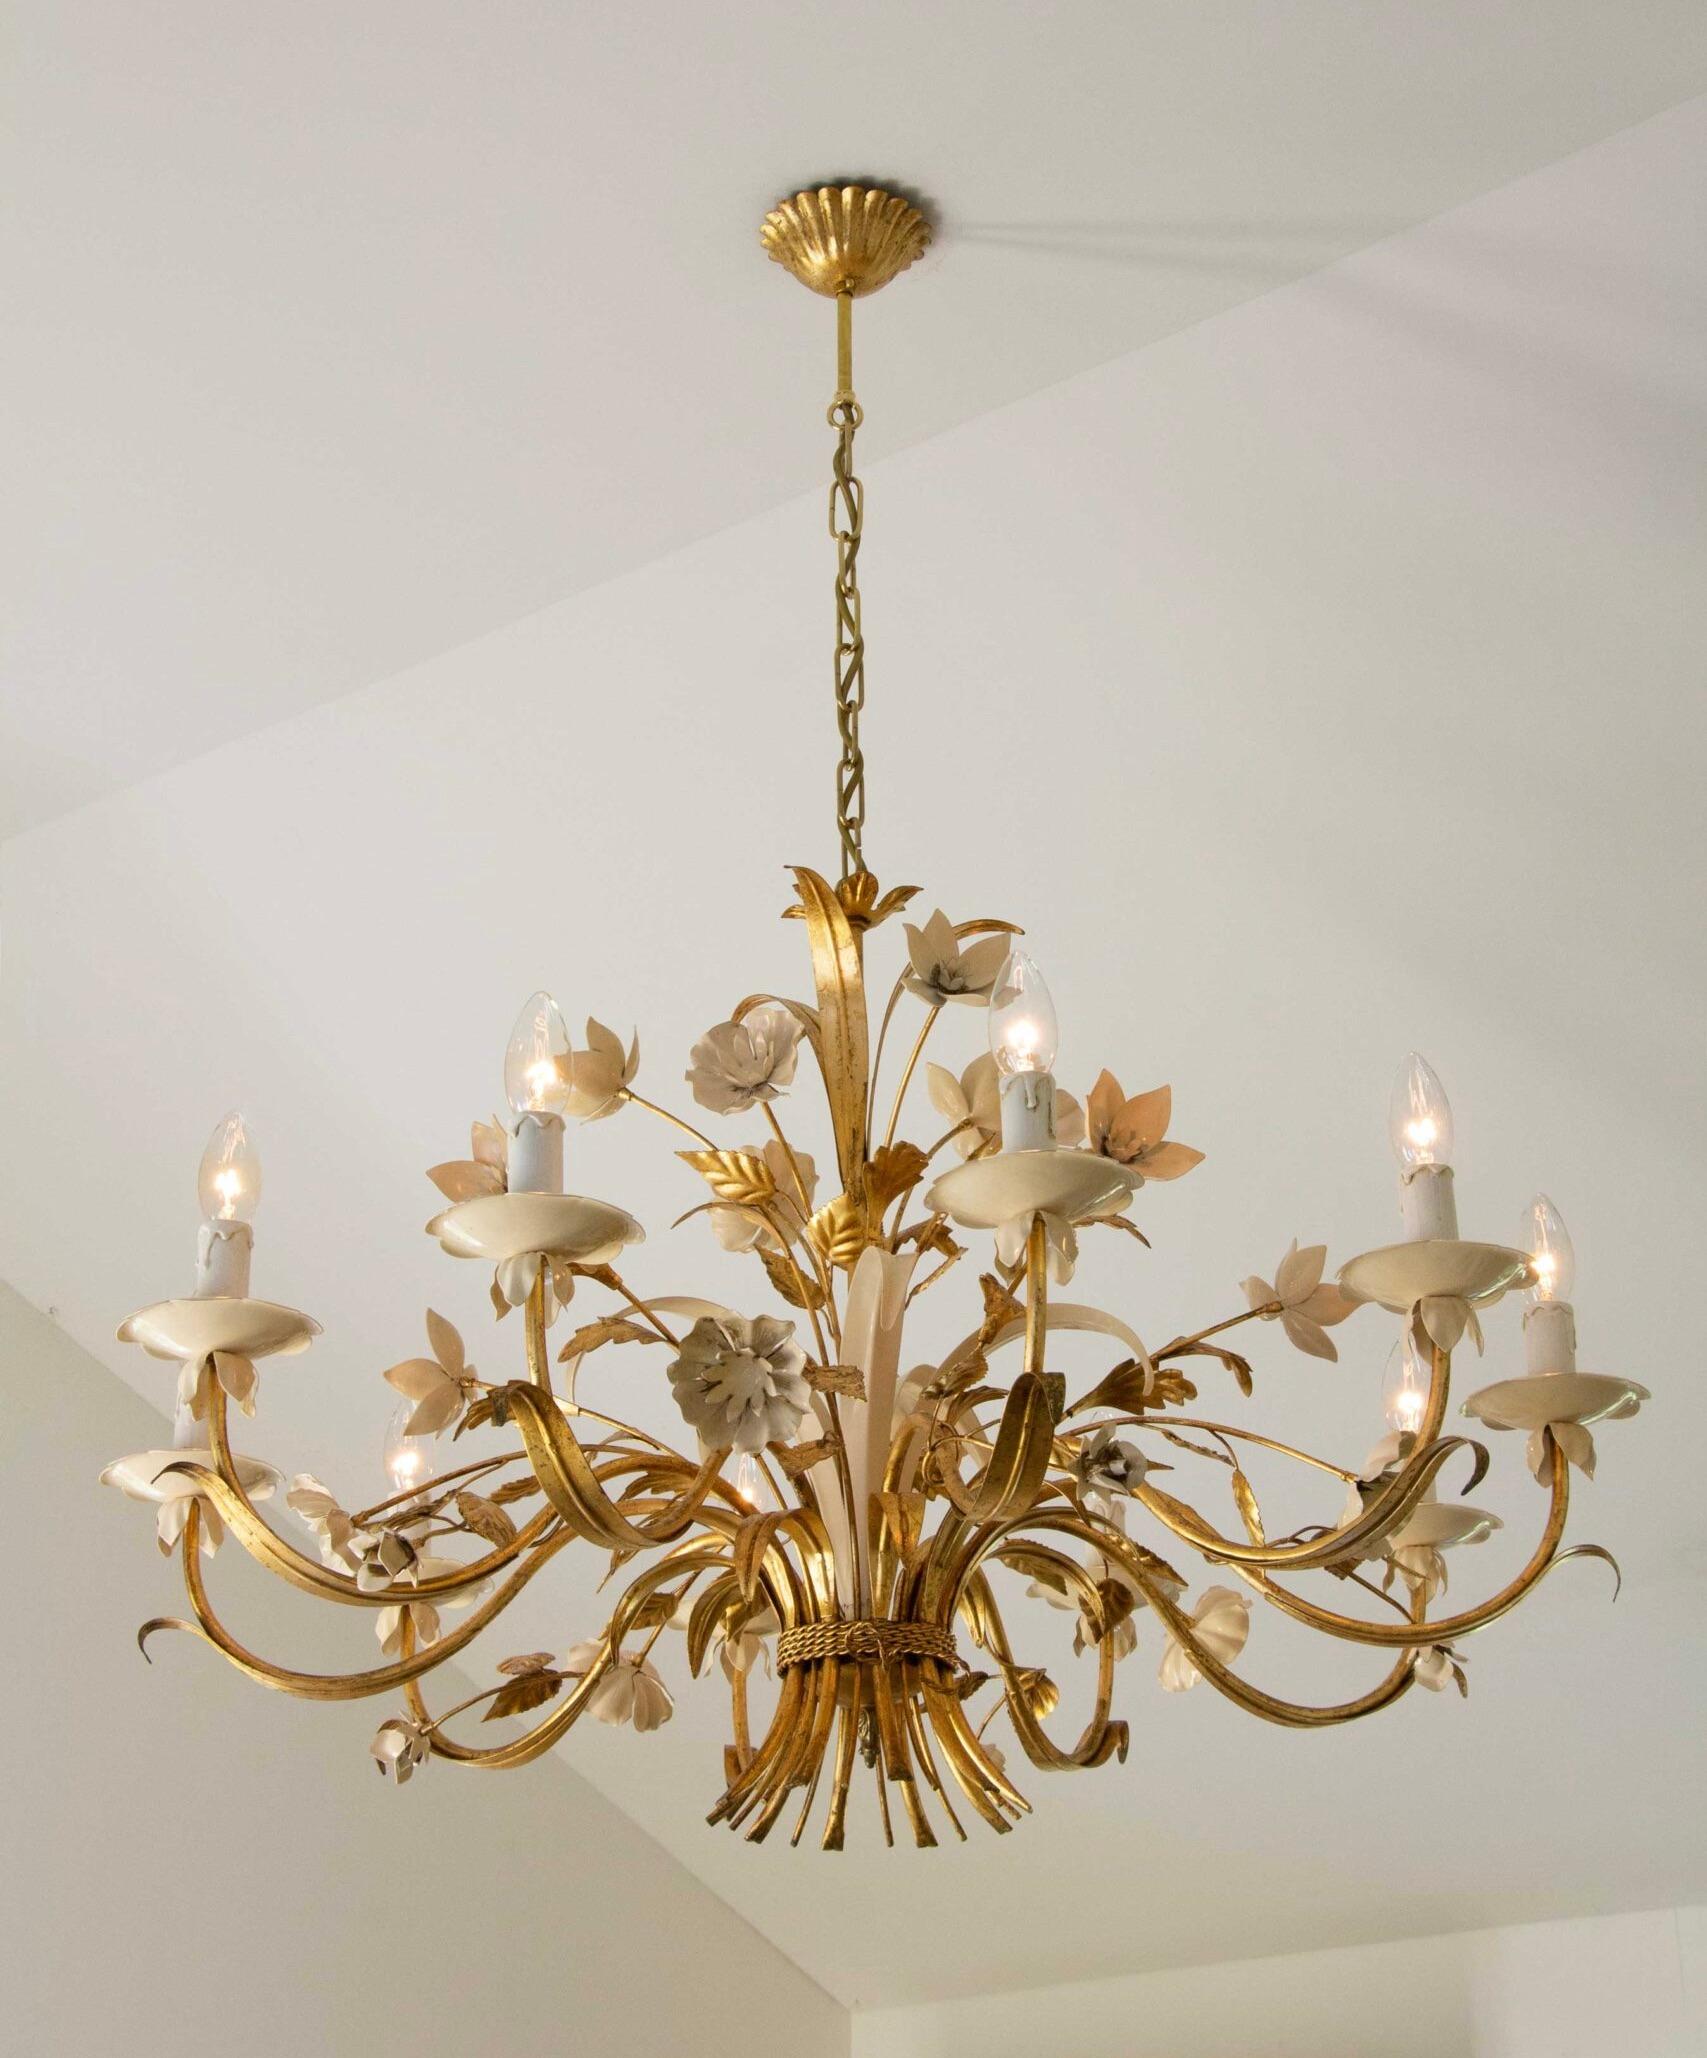 Gilded and white patinated Italian chandelier with 10 candle lamps.
Decorated with leaves and flowers, circa 1970.

Colour
gold / brass, white

Height fixture 21.6